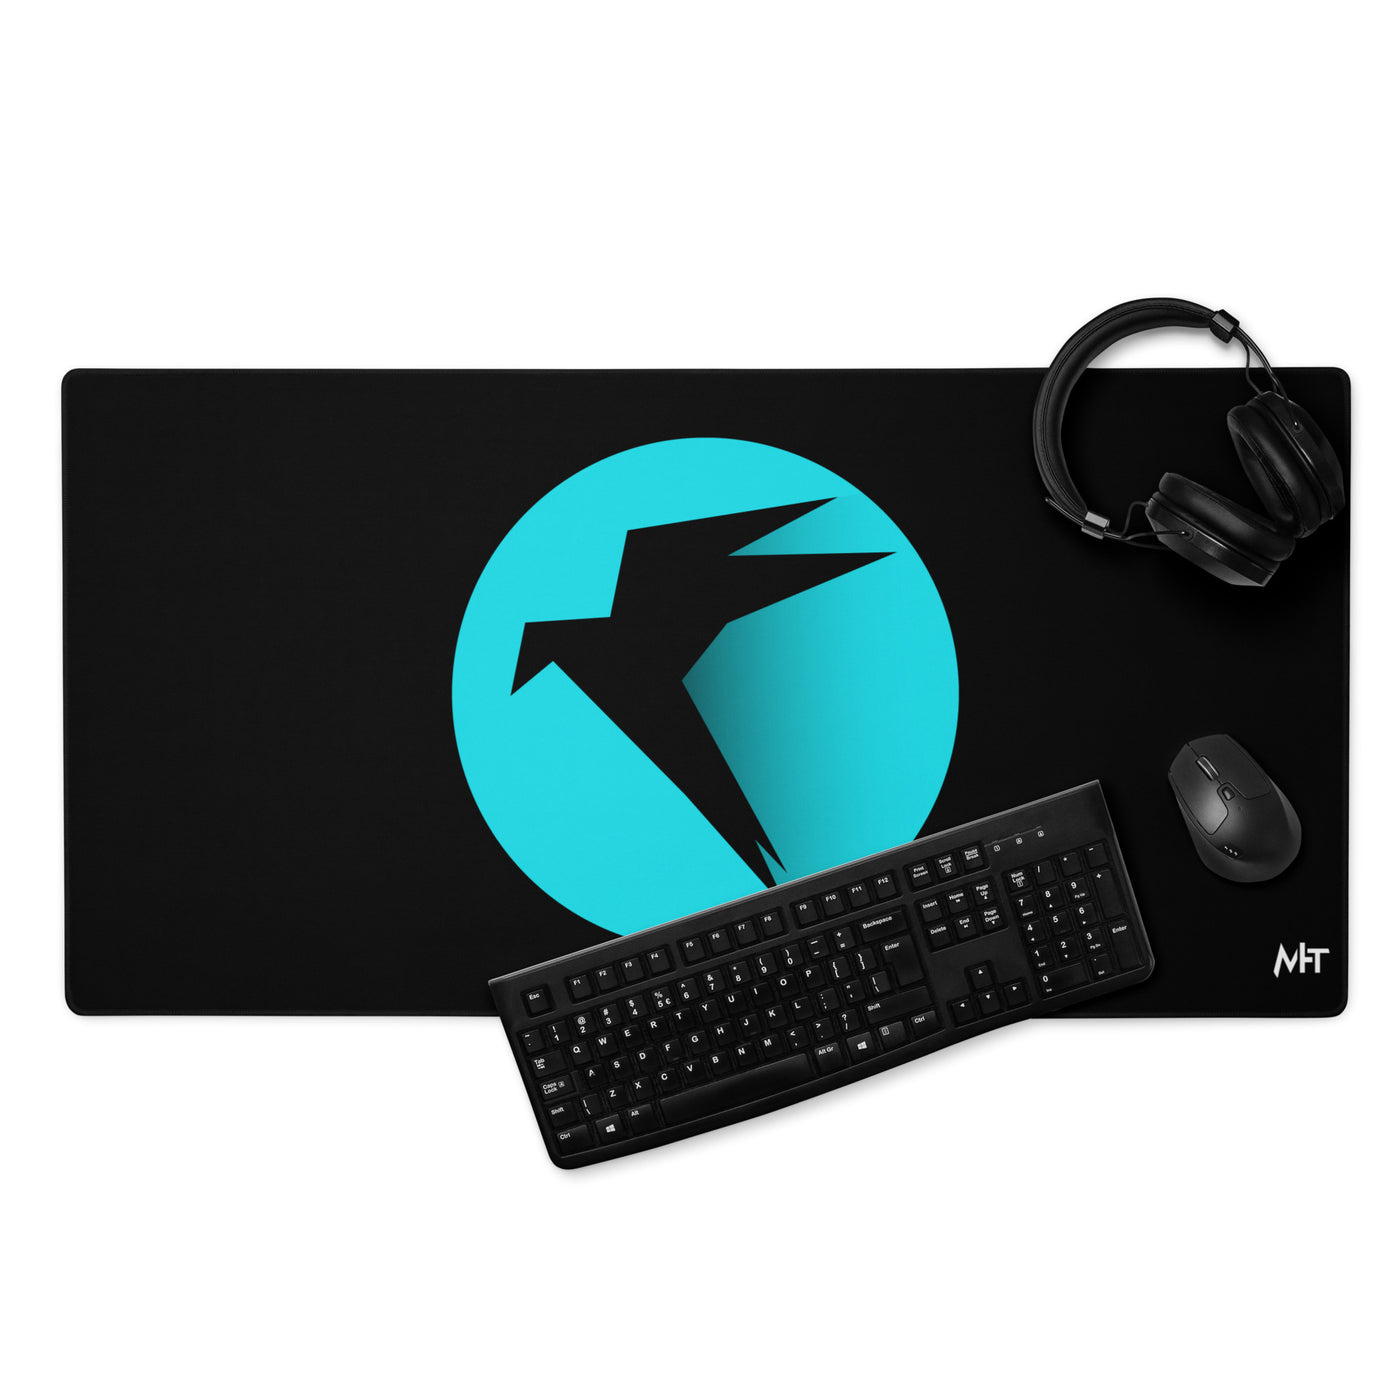 Parrot OS - The Operating System for Hackers - Gaming mouse pad